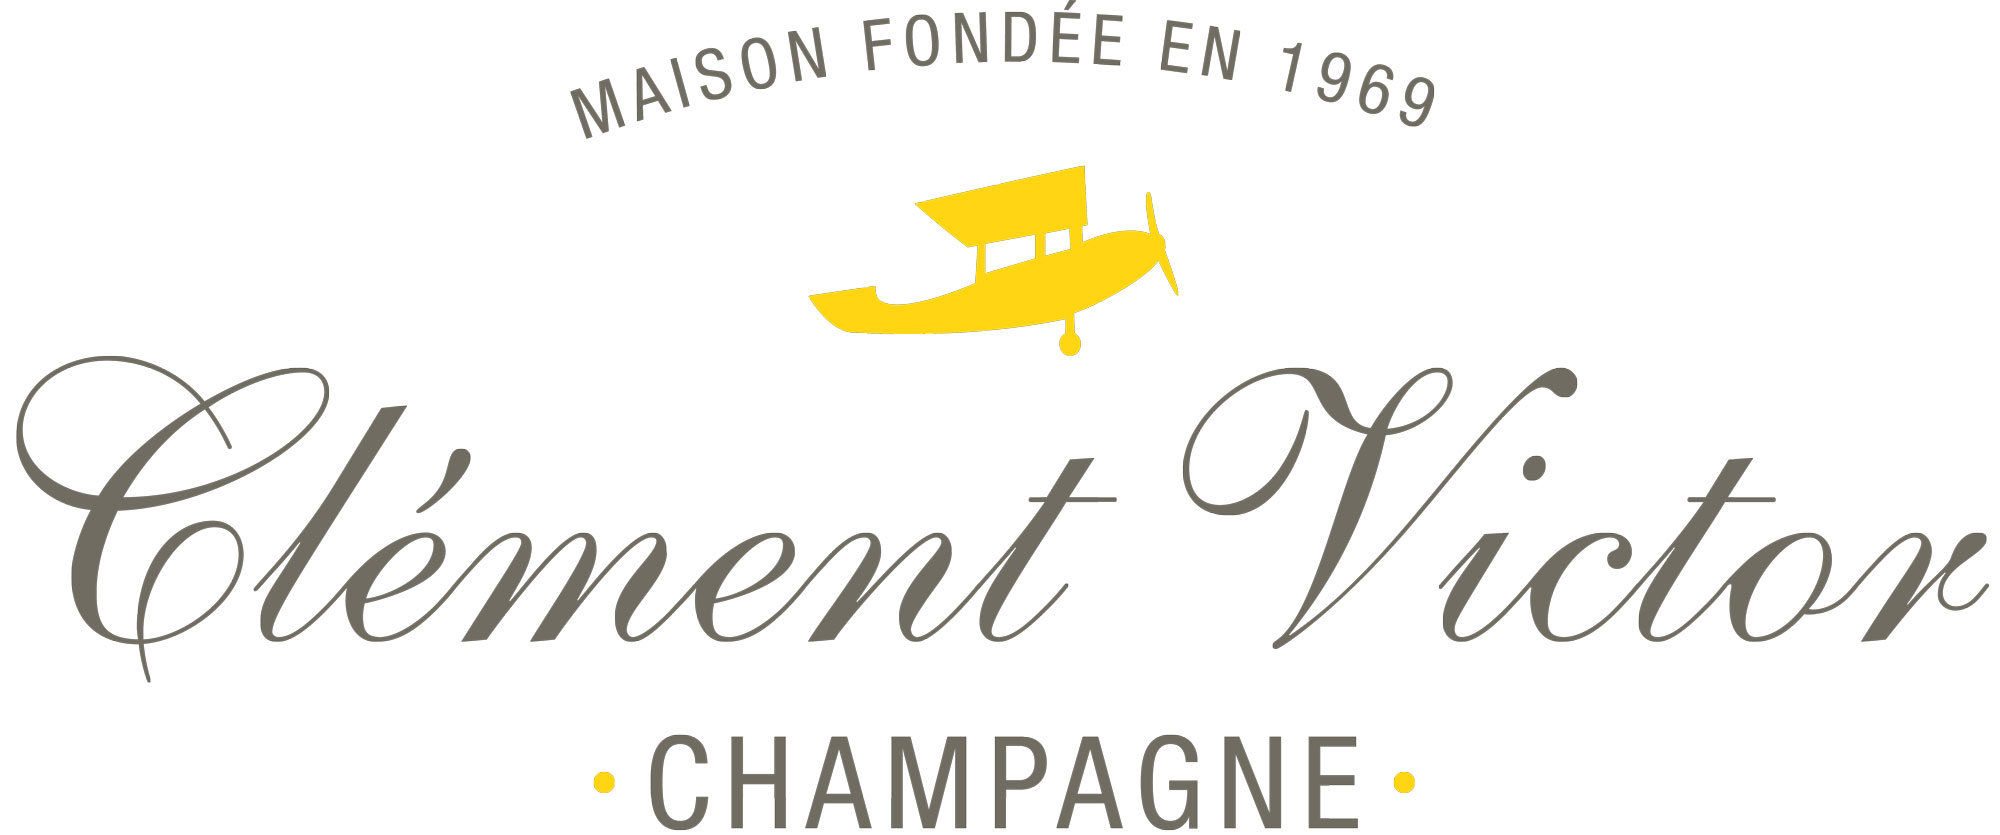 Champagne Clément Victor